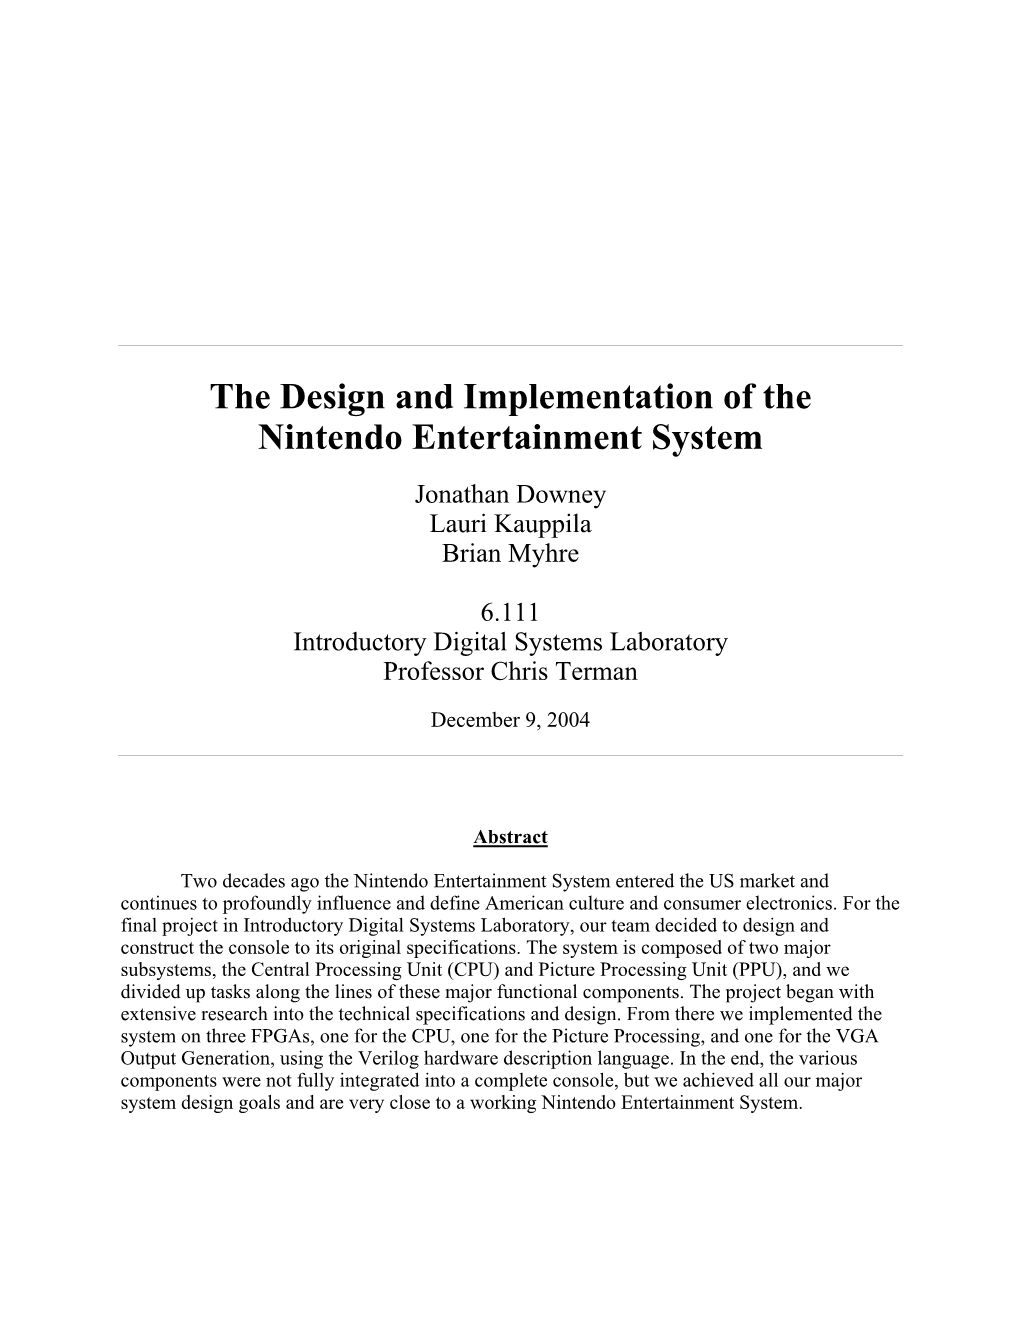 The Design and Implementation of the Nintendo Entertainment System